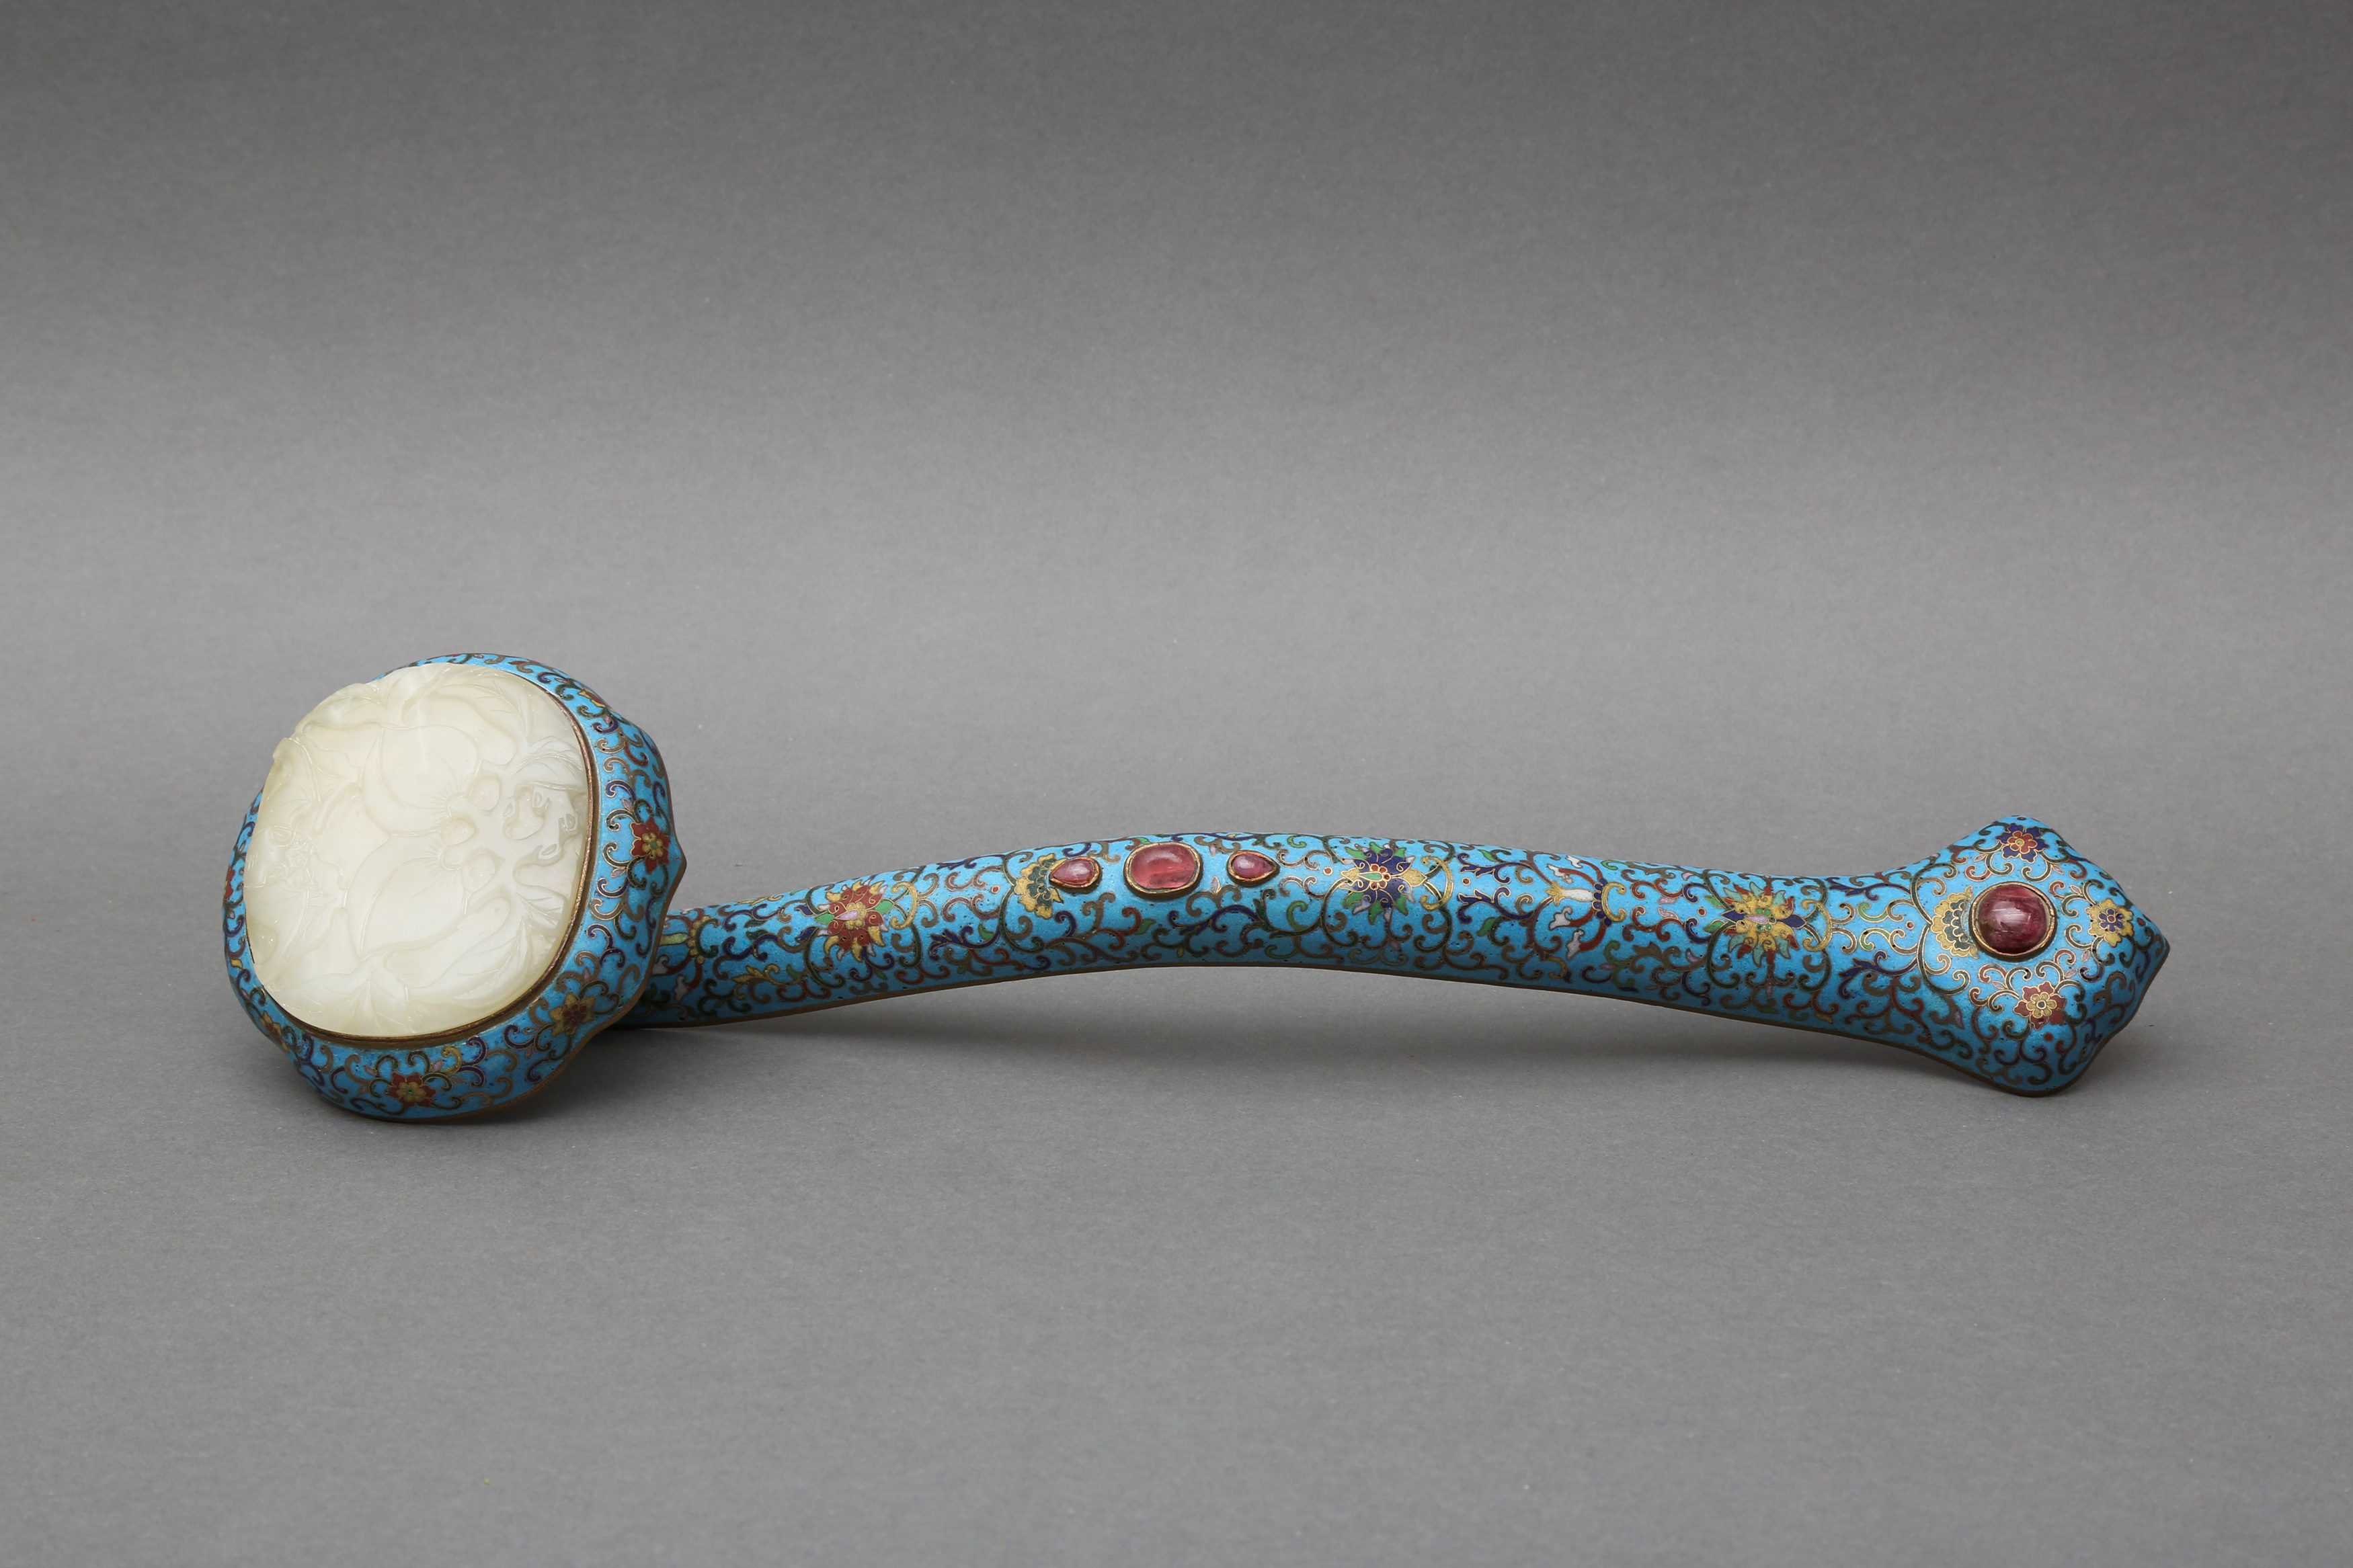 A LARGE CHINESE GILT AND CLOISONNÉ ENAMELED METAL RUYI SCEPTER WITH A WHITE JADE MOUNT 清 掐絲琺琅嵌玉如意